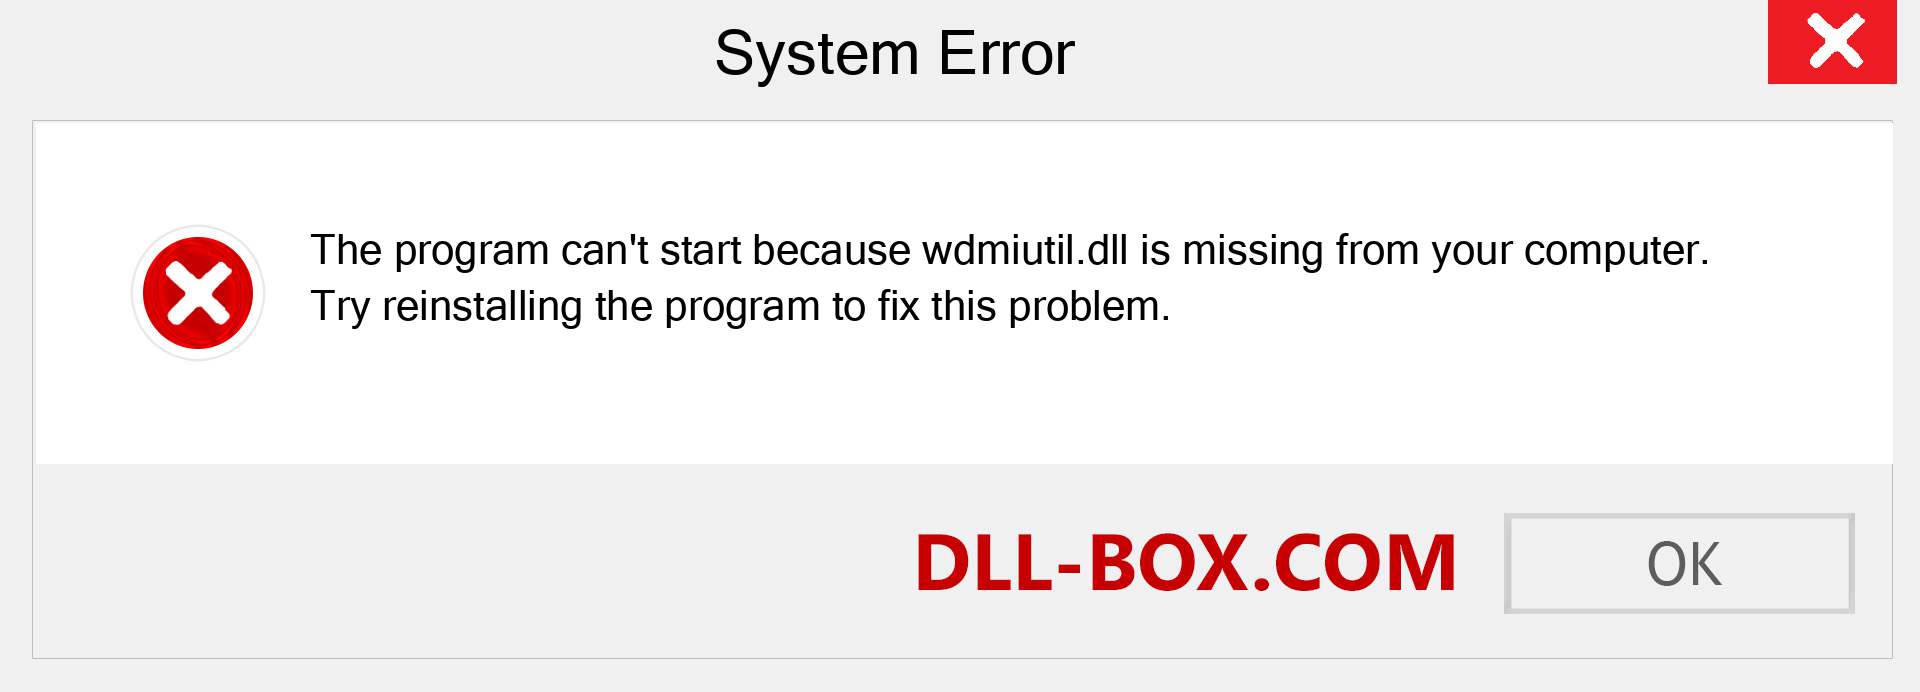  wdmiutil.dll file is missing?. Download for Windows 7, 8, 10 - Fix  wdmiutil dll Missing Error on Windows, photos, images